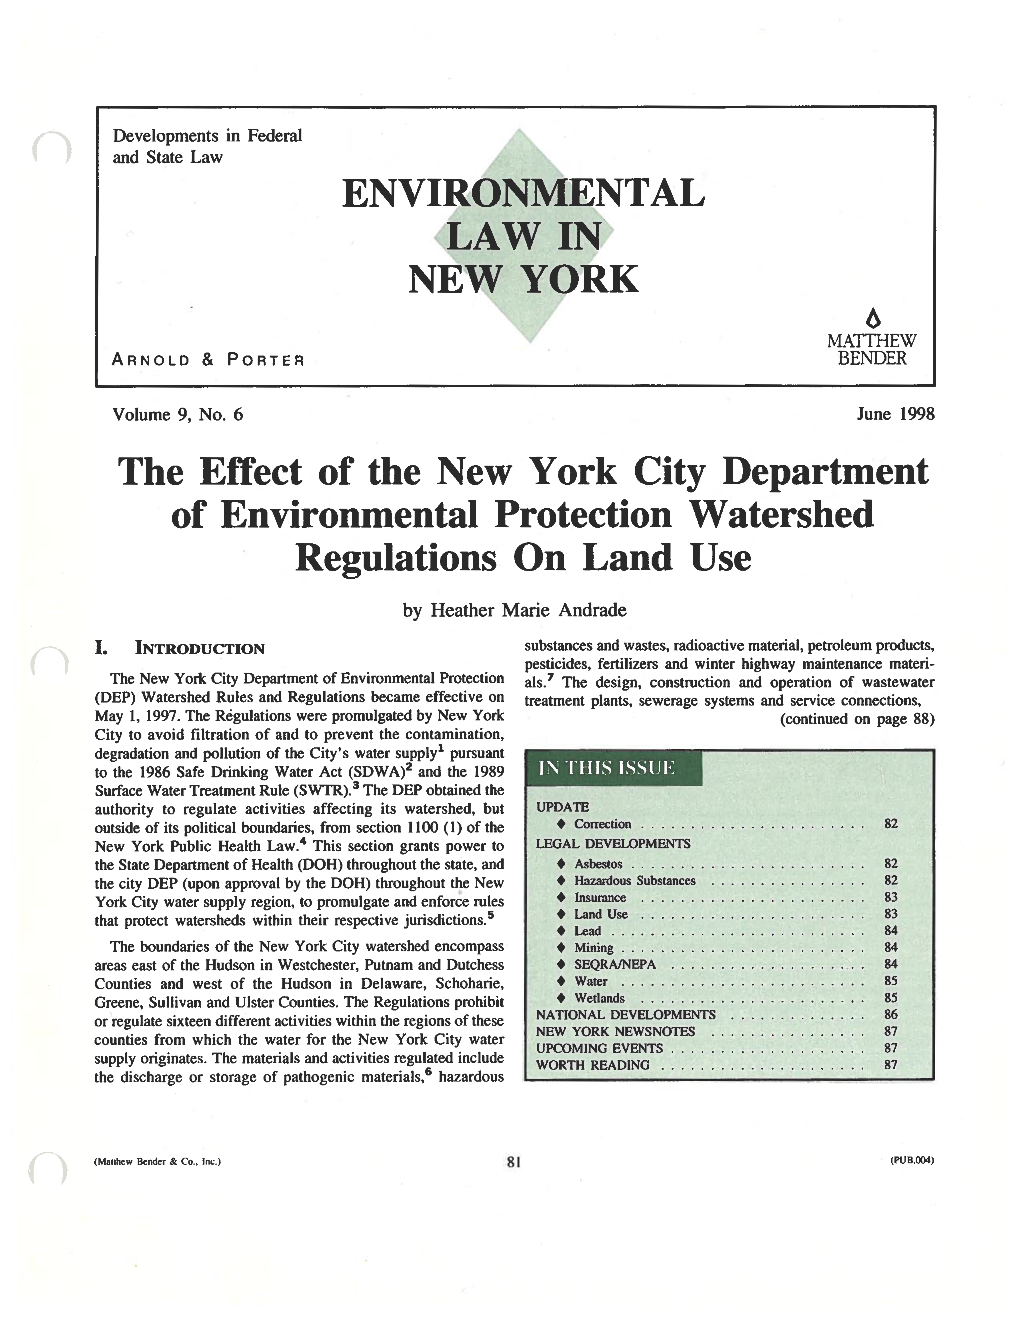 ENVIRONMENTAL LAW in NEW YORK the Effect of the New York